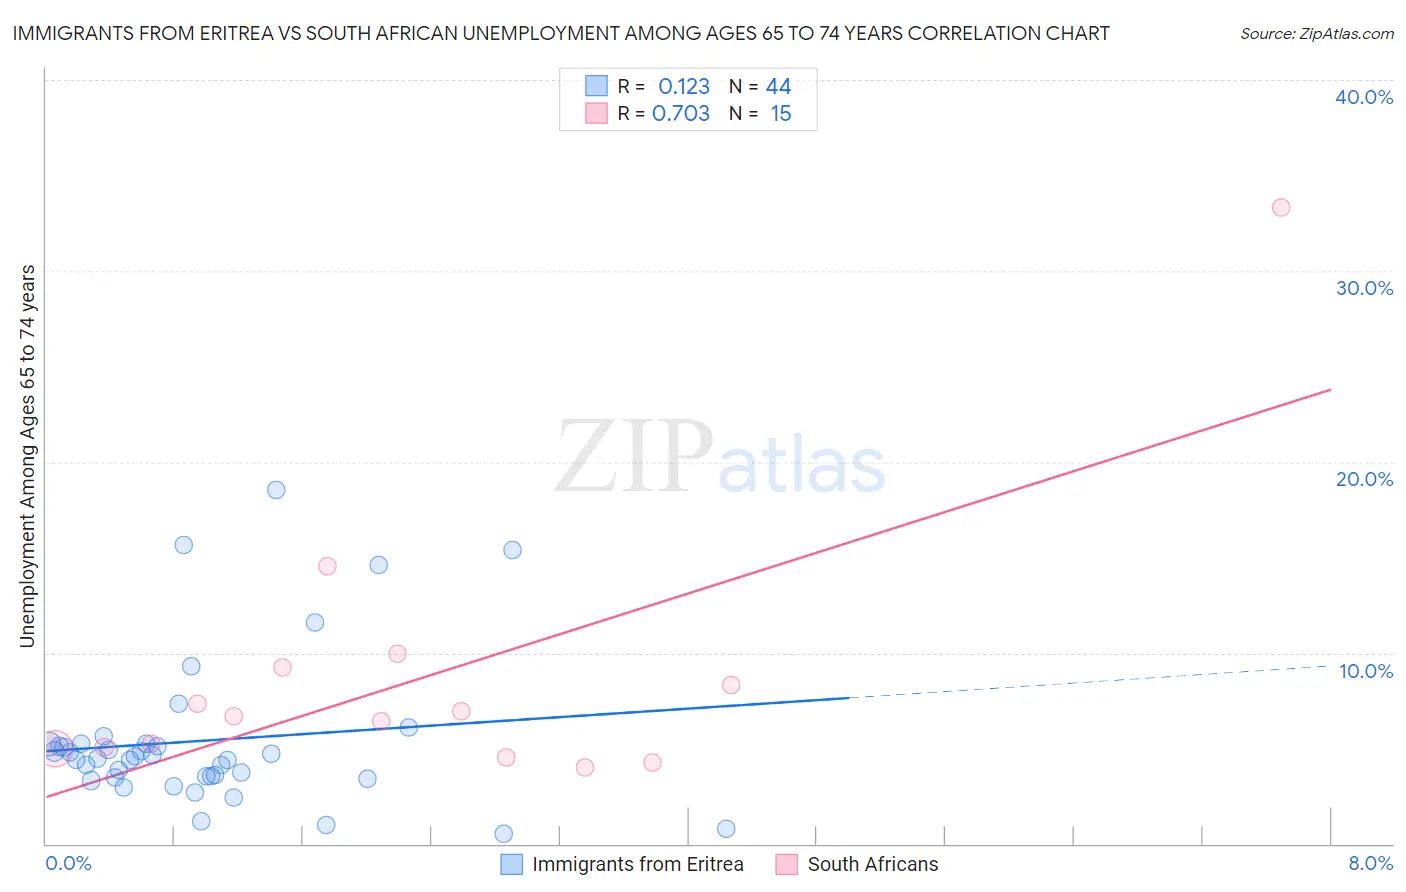 Immigrants from Eritrea vs South African Unemployment Among Ages 65 to 74 years